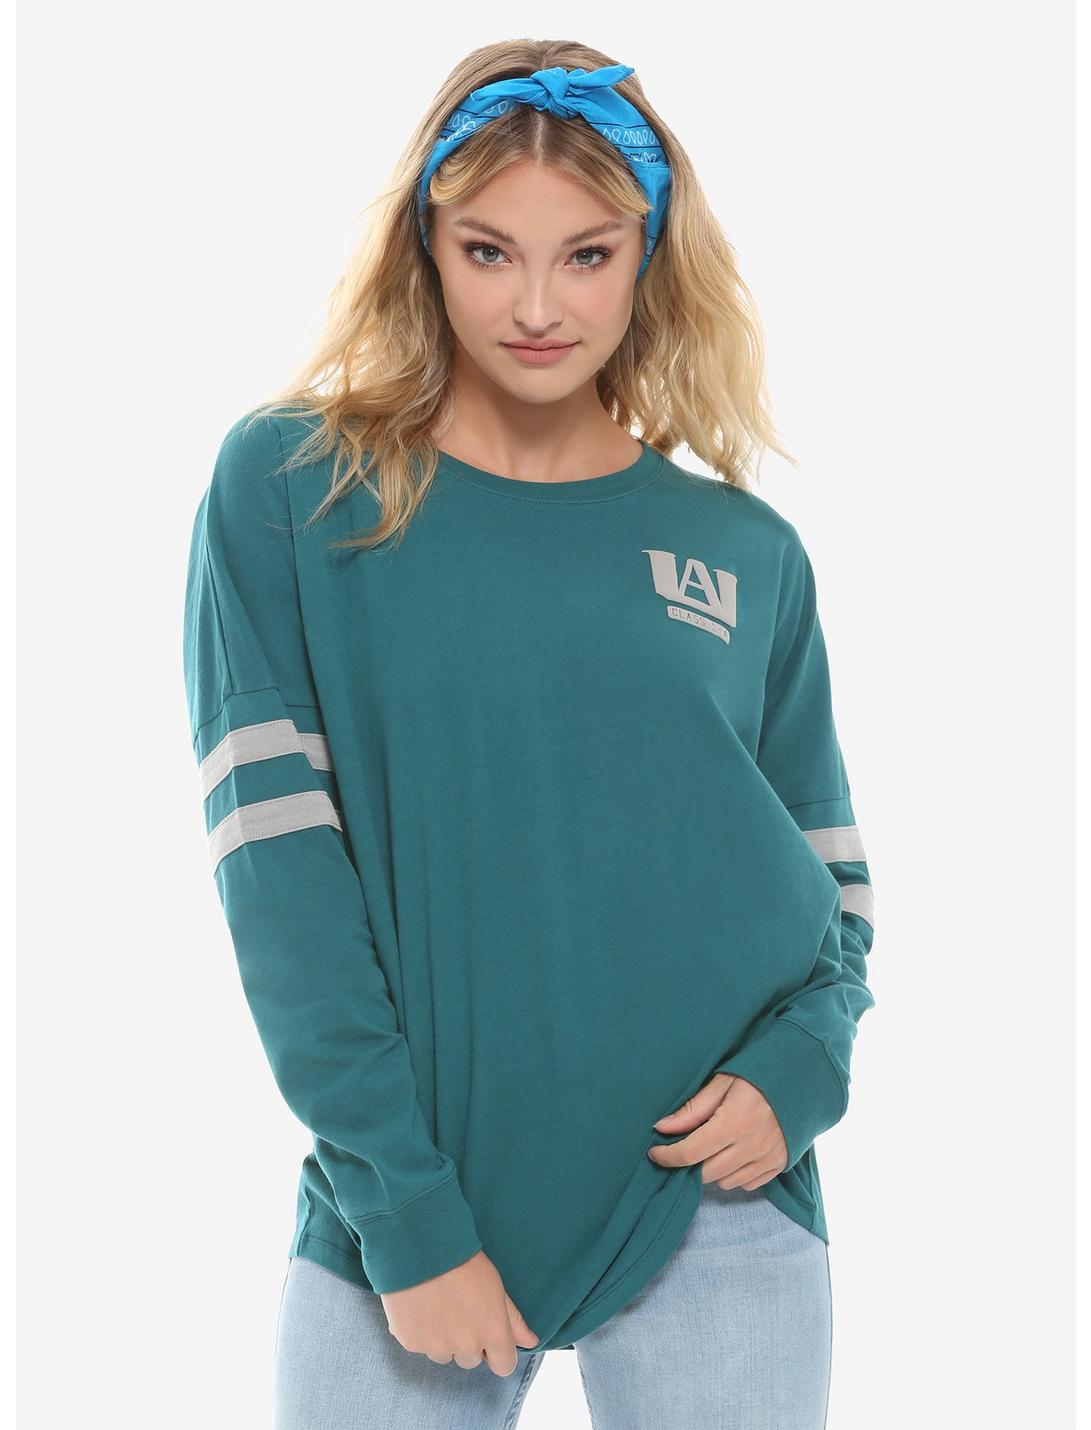 My Hero Academia Teal Girls Athletic Jersey, WHITE, hi-res